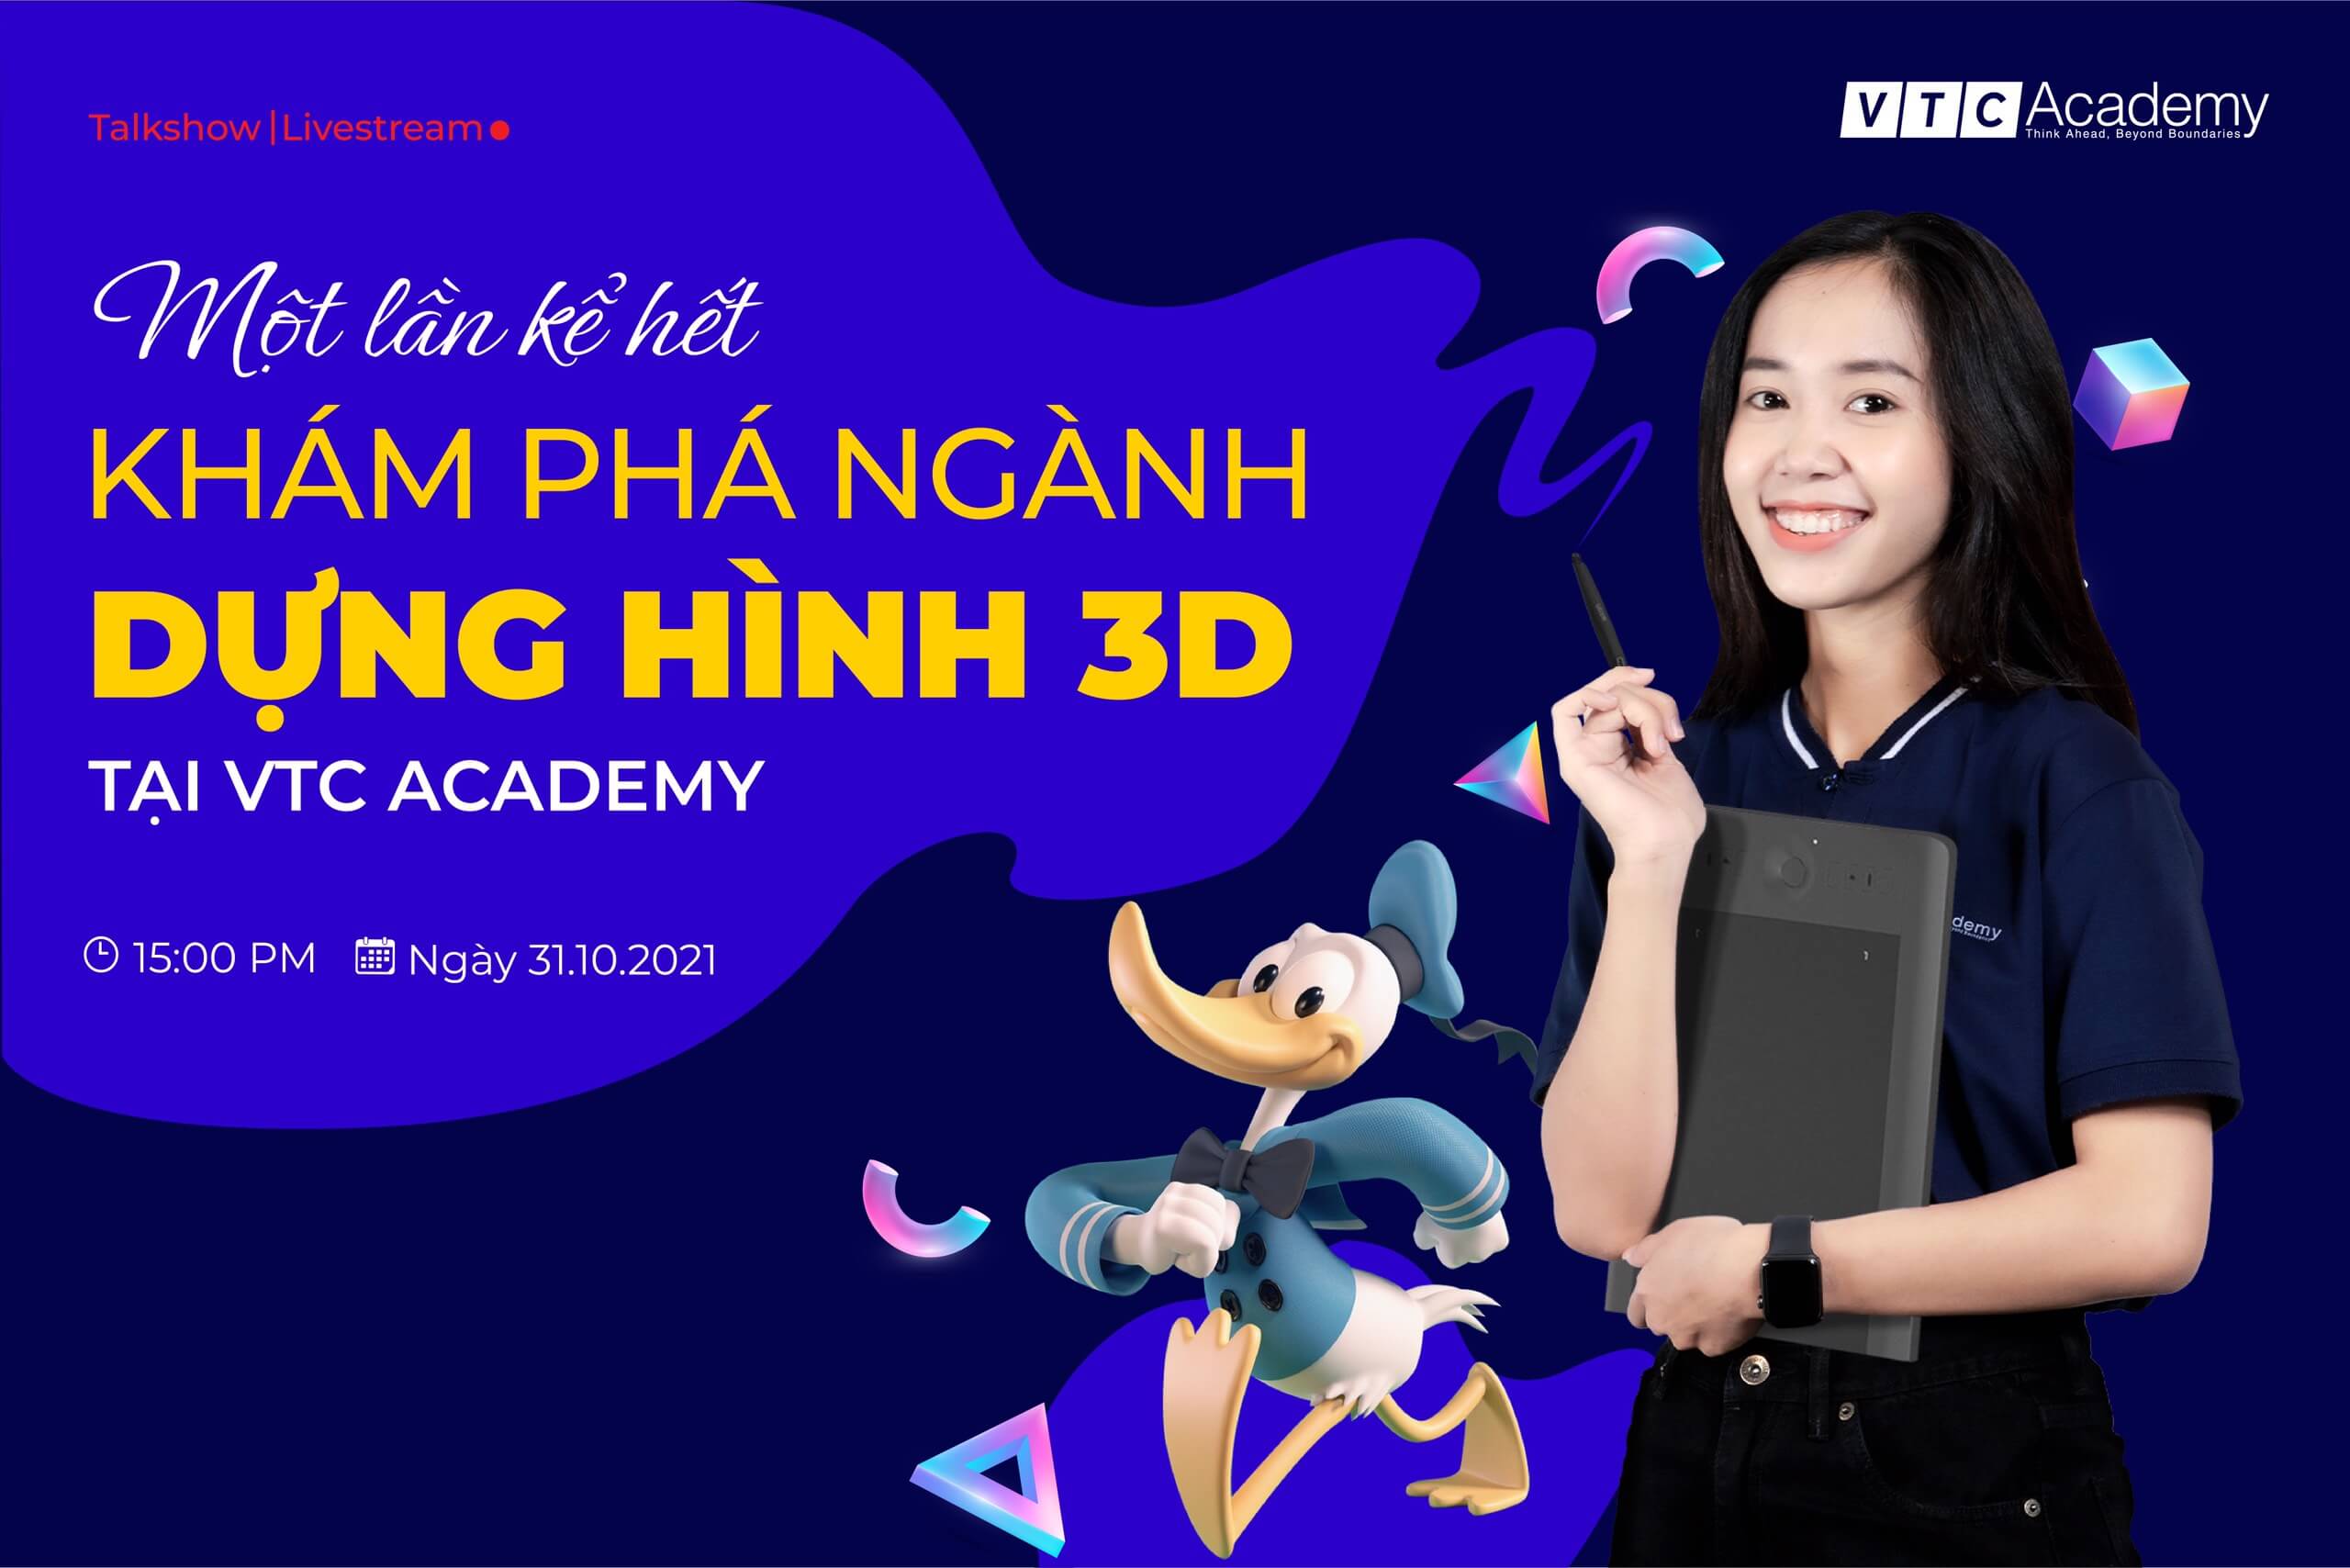 Online Talkshow: “All AT ONCE” – DISCOVER 3D RECORDING INDUSTRY AT VTC ACADEMY